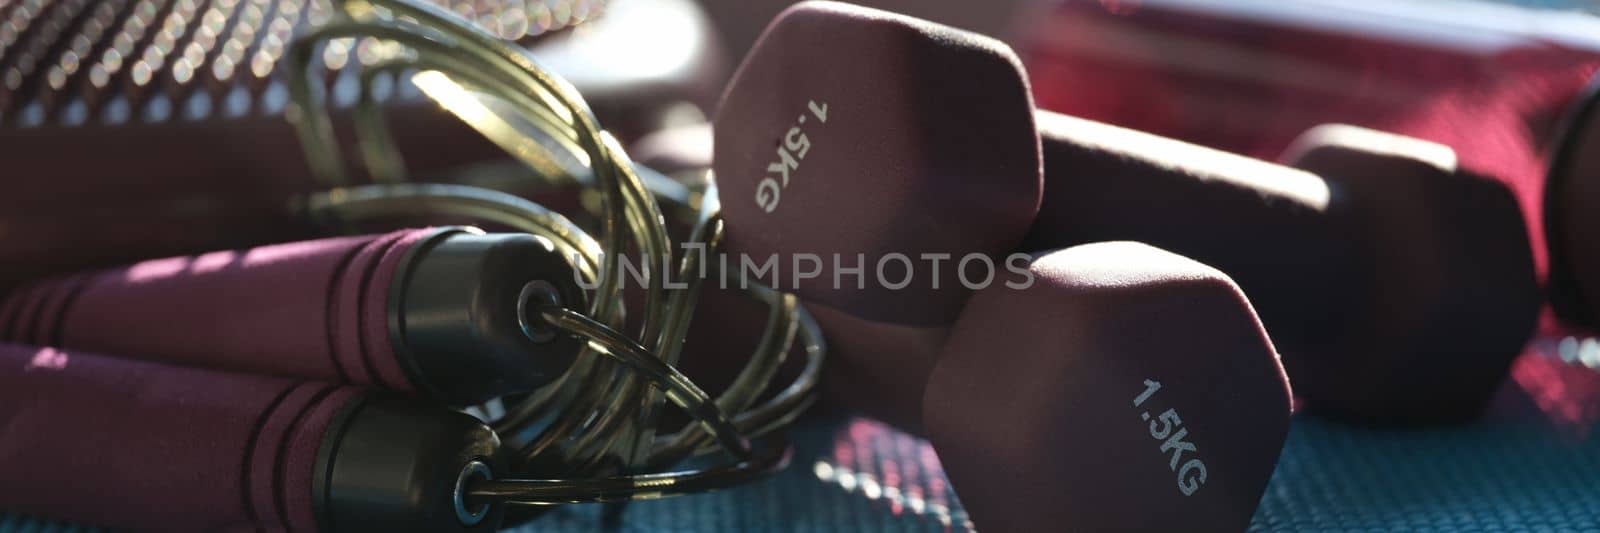 Gym equipment for training at home closeup by kuprevich